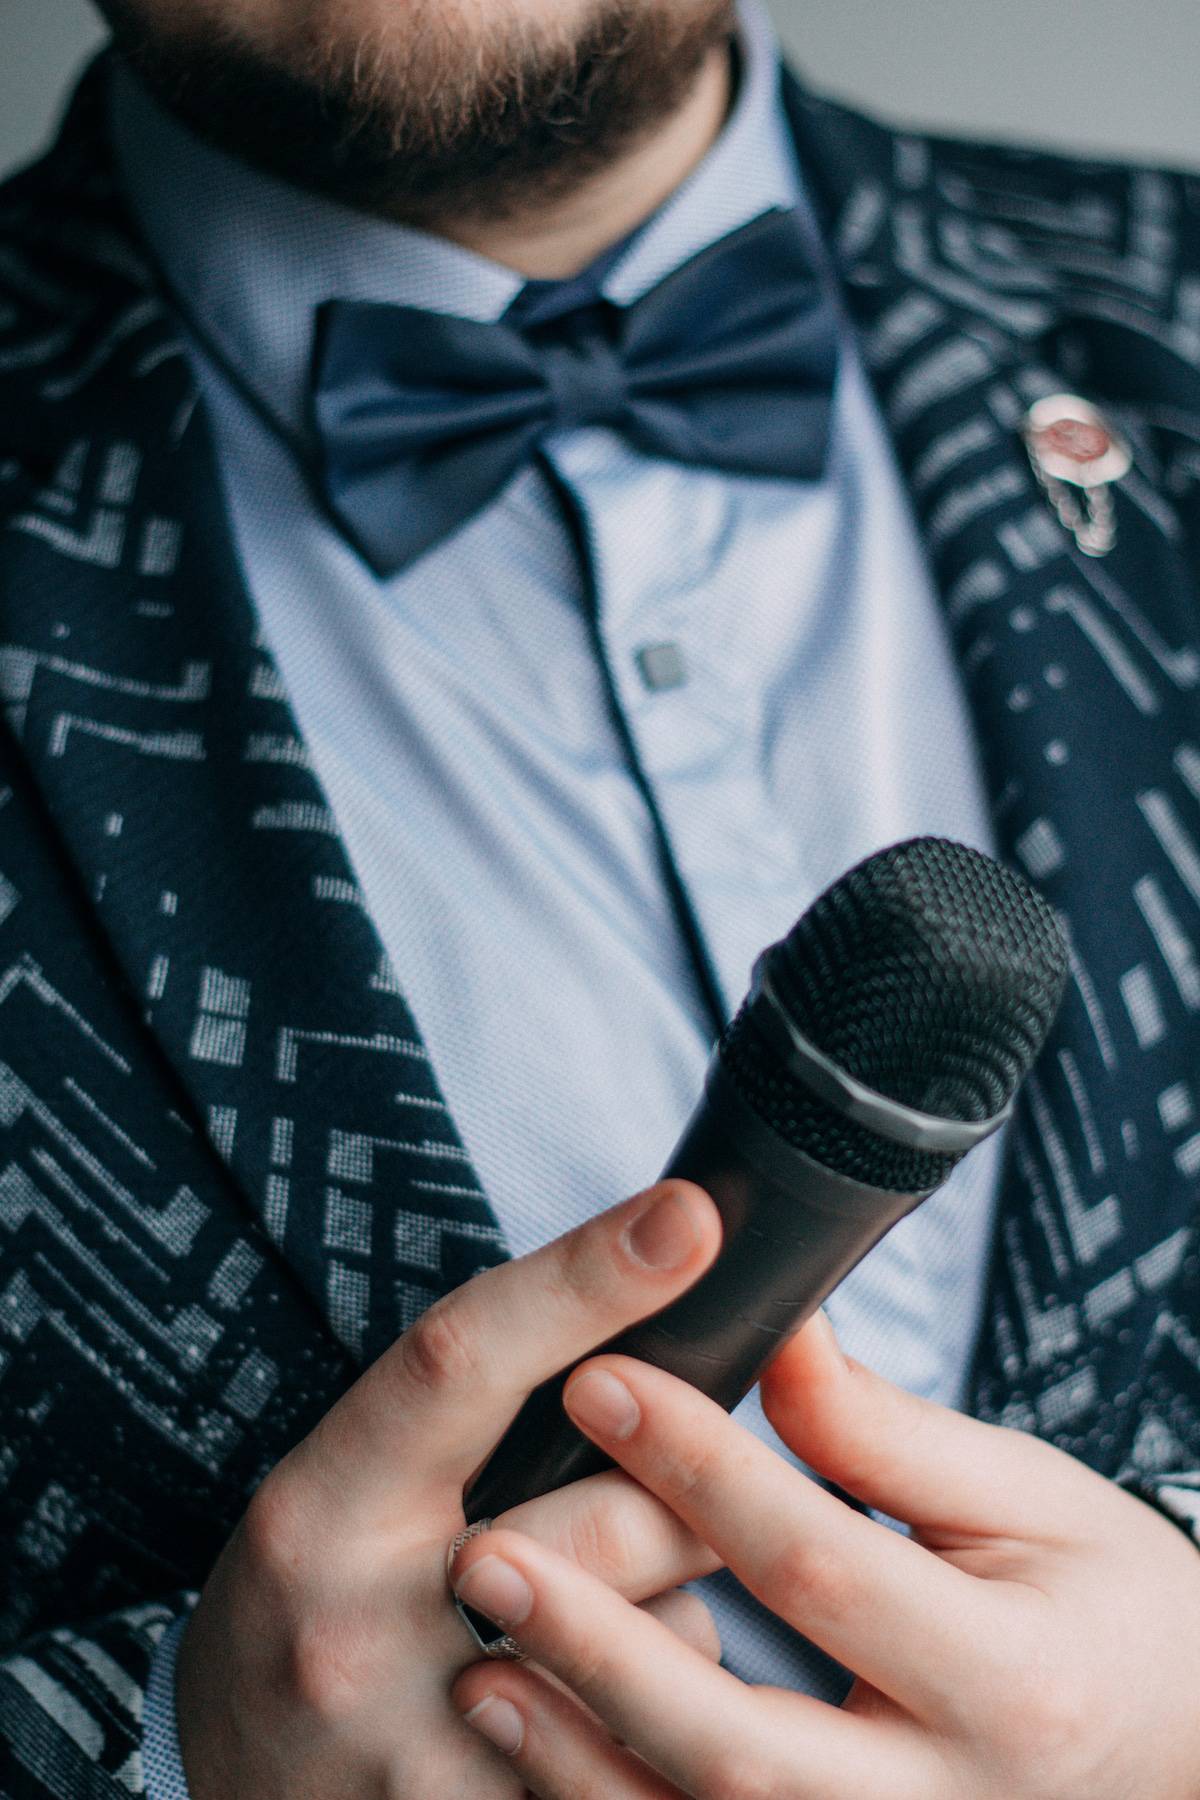 Master of ceremonies with microphone. Man with a beard and tie butterfly close-up. Business suit, speech and speaking, talk show, seminar spokesman.